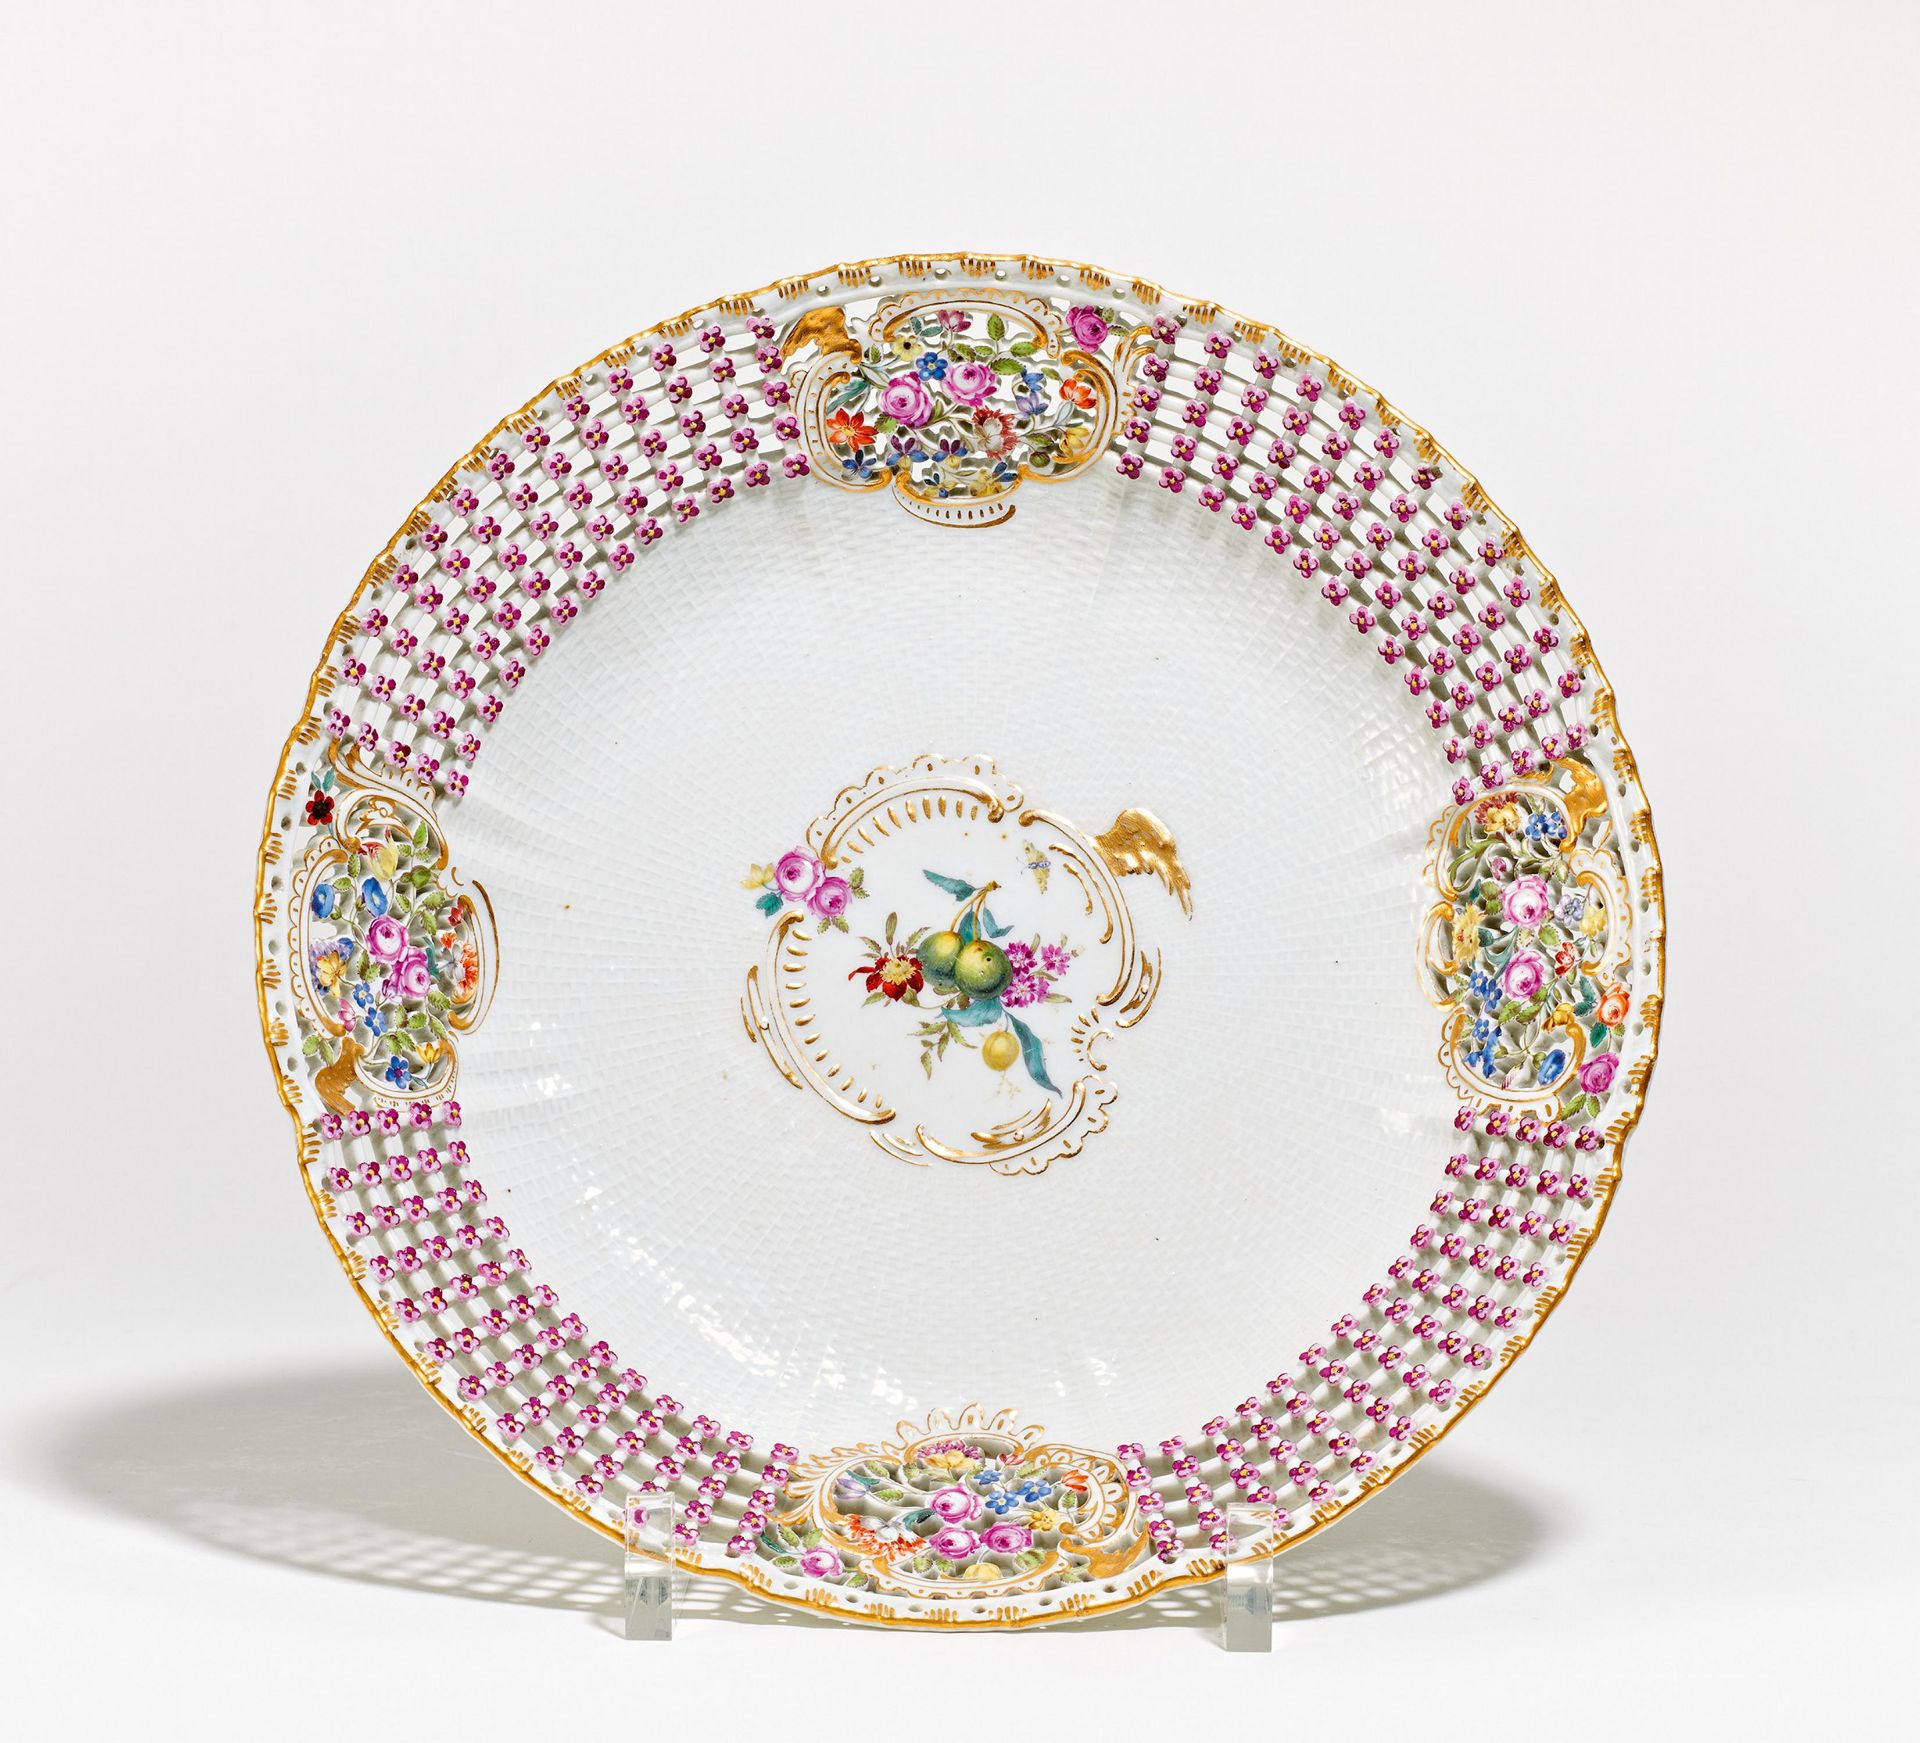 LARGE PORCELAIN DESSERT BOWL FROM THE SO CALLED "SCHWERIN-SERVICE". Meissen. Date: 1762/63.